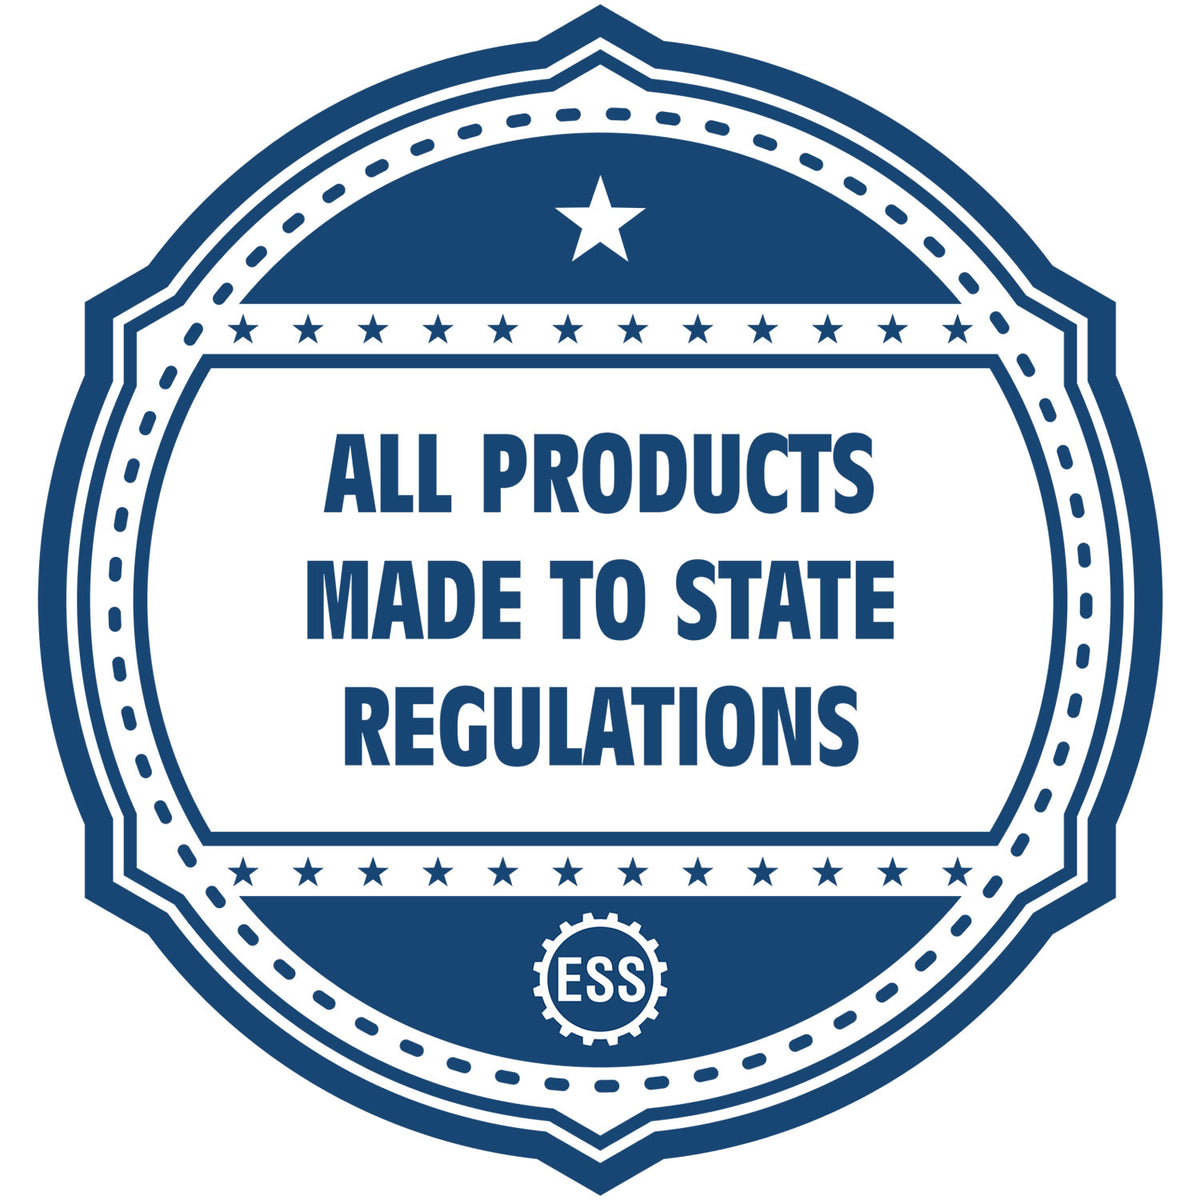 An icon or badge element for the Wooden Handle Colorado Rectangular Notary Public Stamp showing that this product is made in compliance with state regulations.